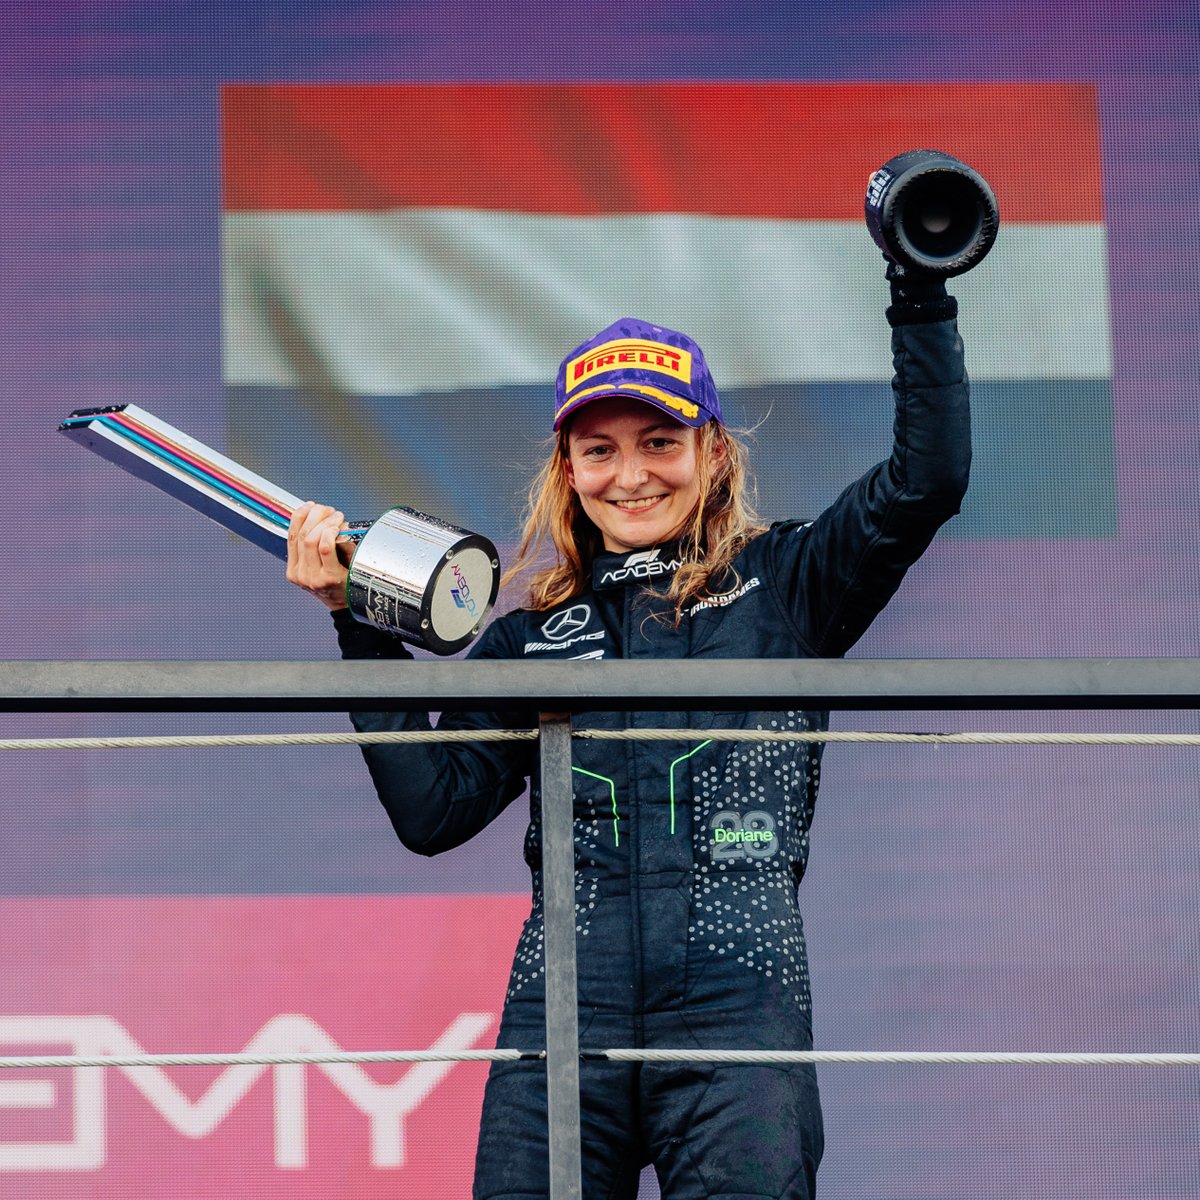 #F1Academy – First of many, @dorianepin ! 🏆 Congrats on winning your first ever @f1academy race! 😍 Good luck for Race 2 in Jeddah tomorrow! 👊 #WorldsFastestFamily #WeLivePerformance